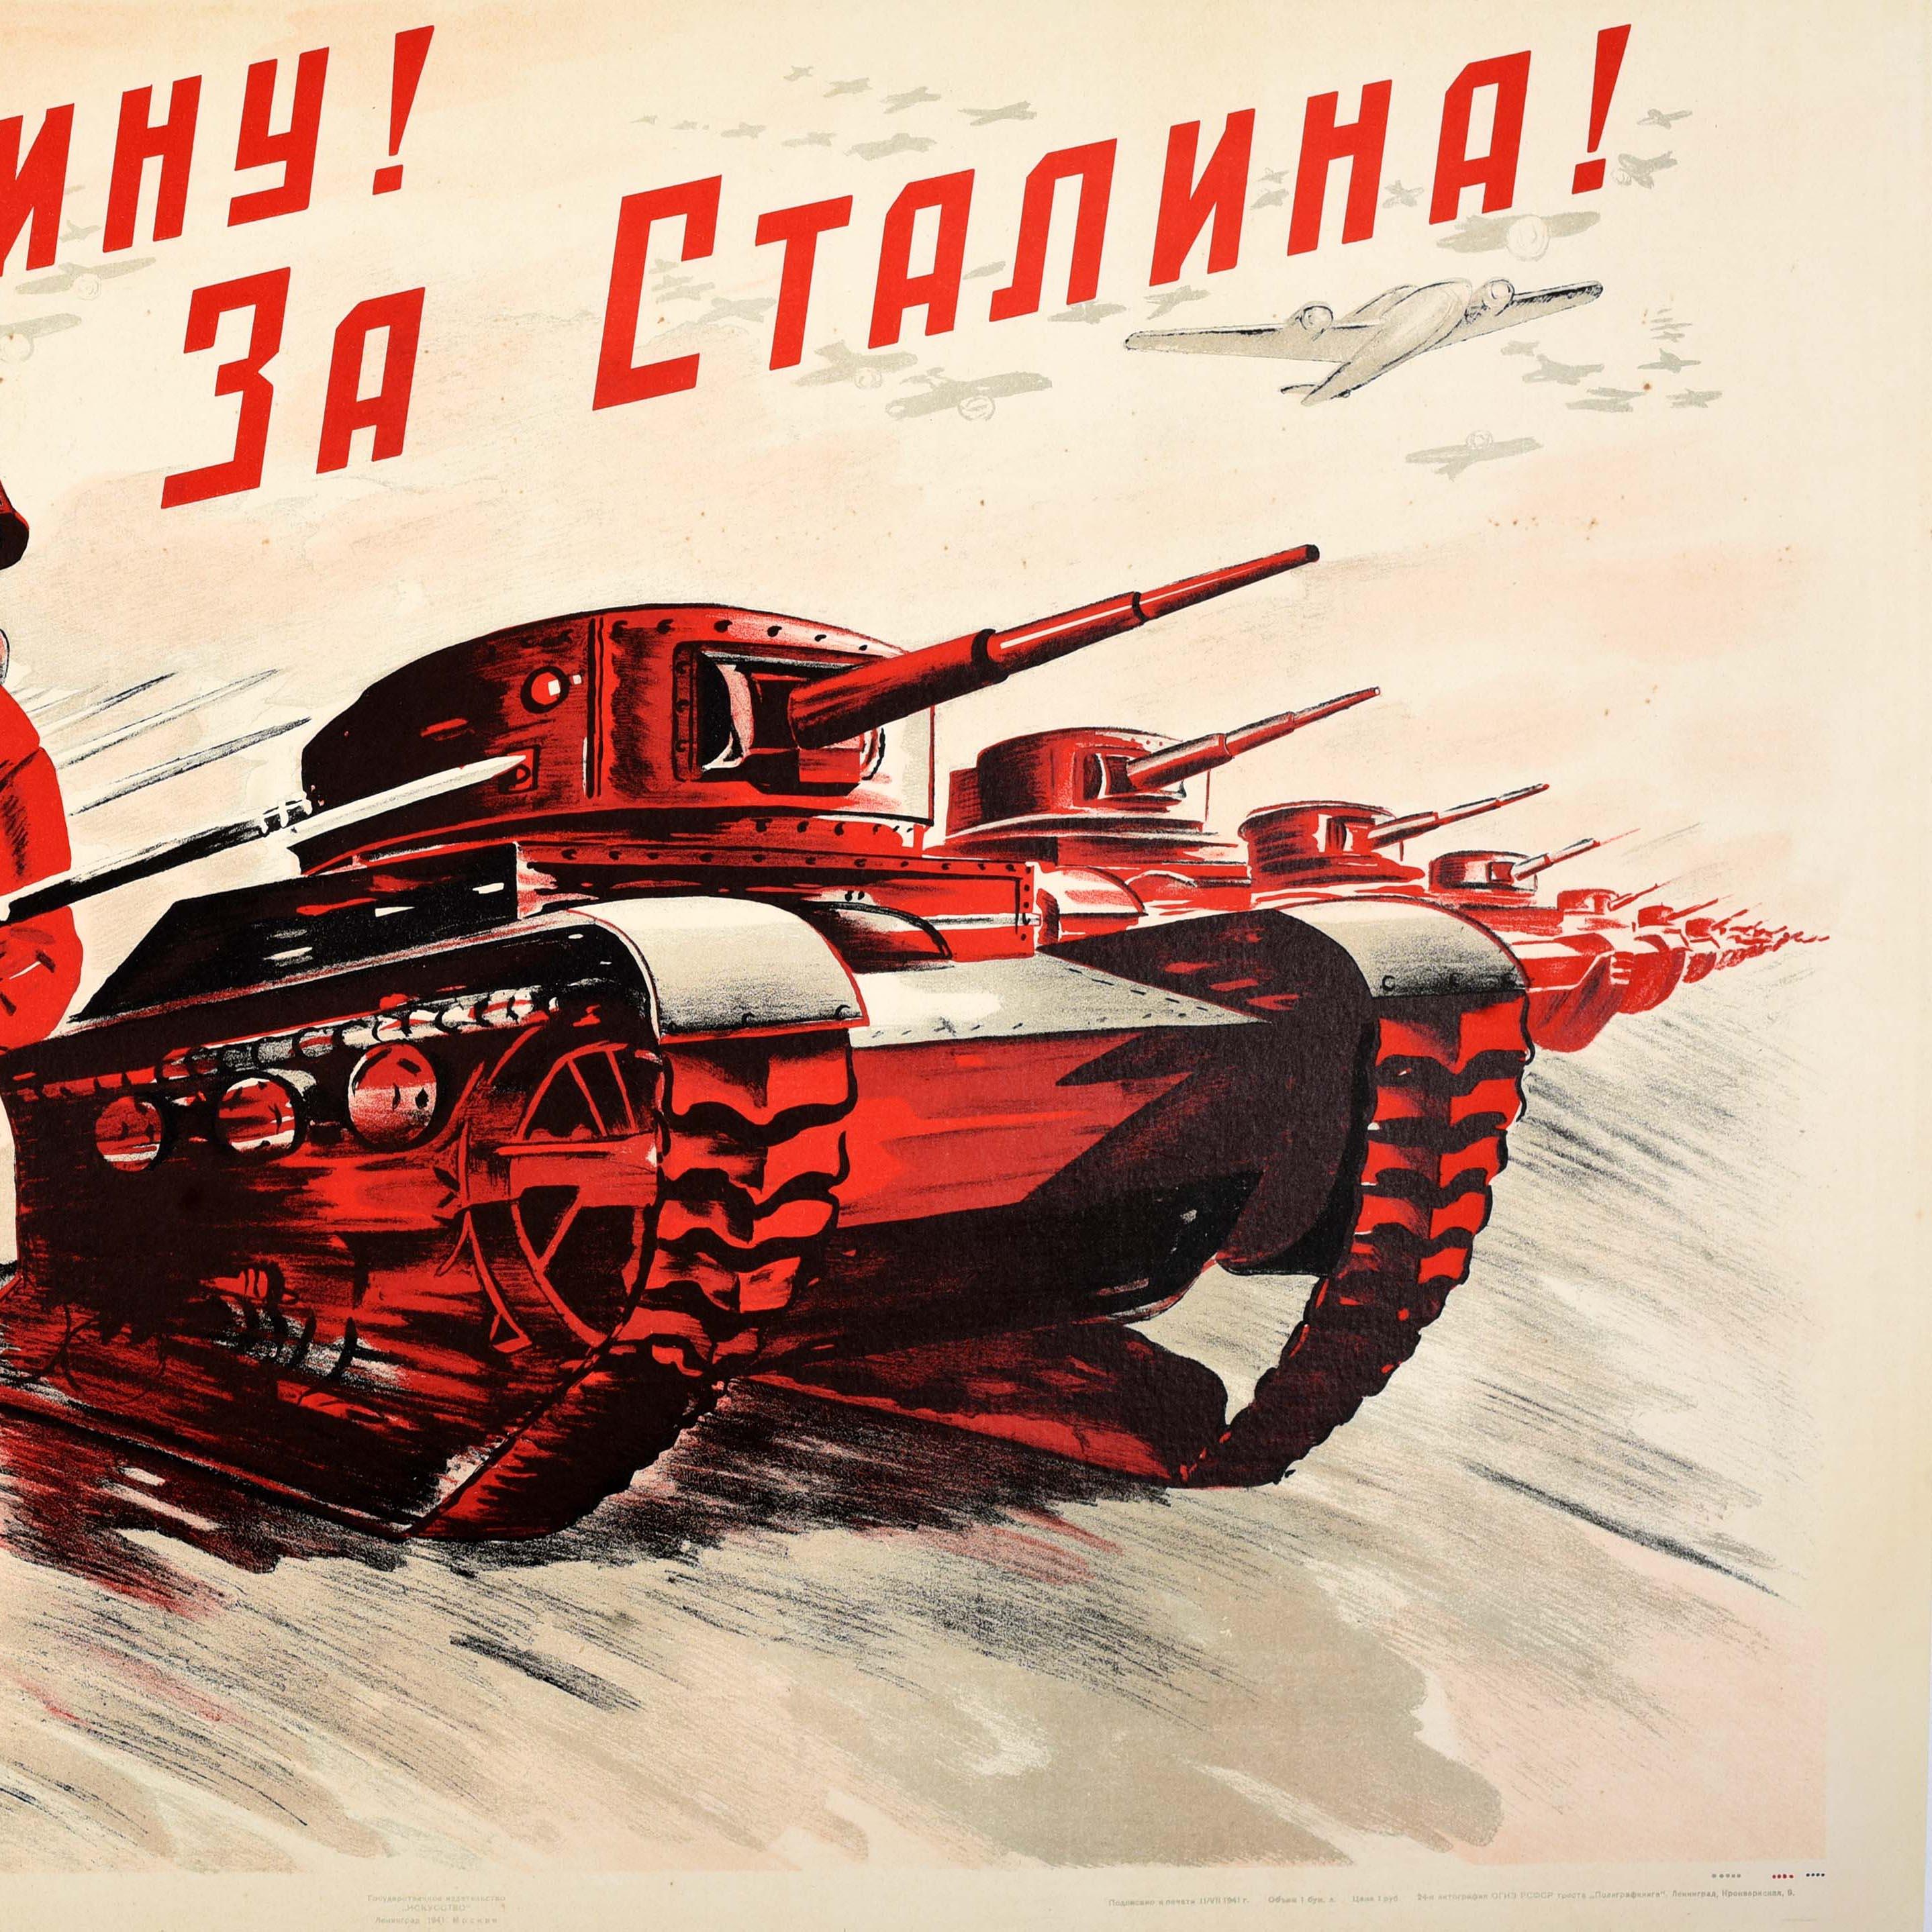 Rare original vintage World War Two Soviet propaganda poster - For the Homeland! For Stalin! / За Родину! За Сталина! - featuring a troop of soldiers carrying bayonet rifle guns charging forward next to a line of military tanks with the bold text